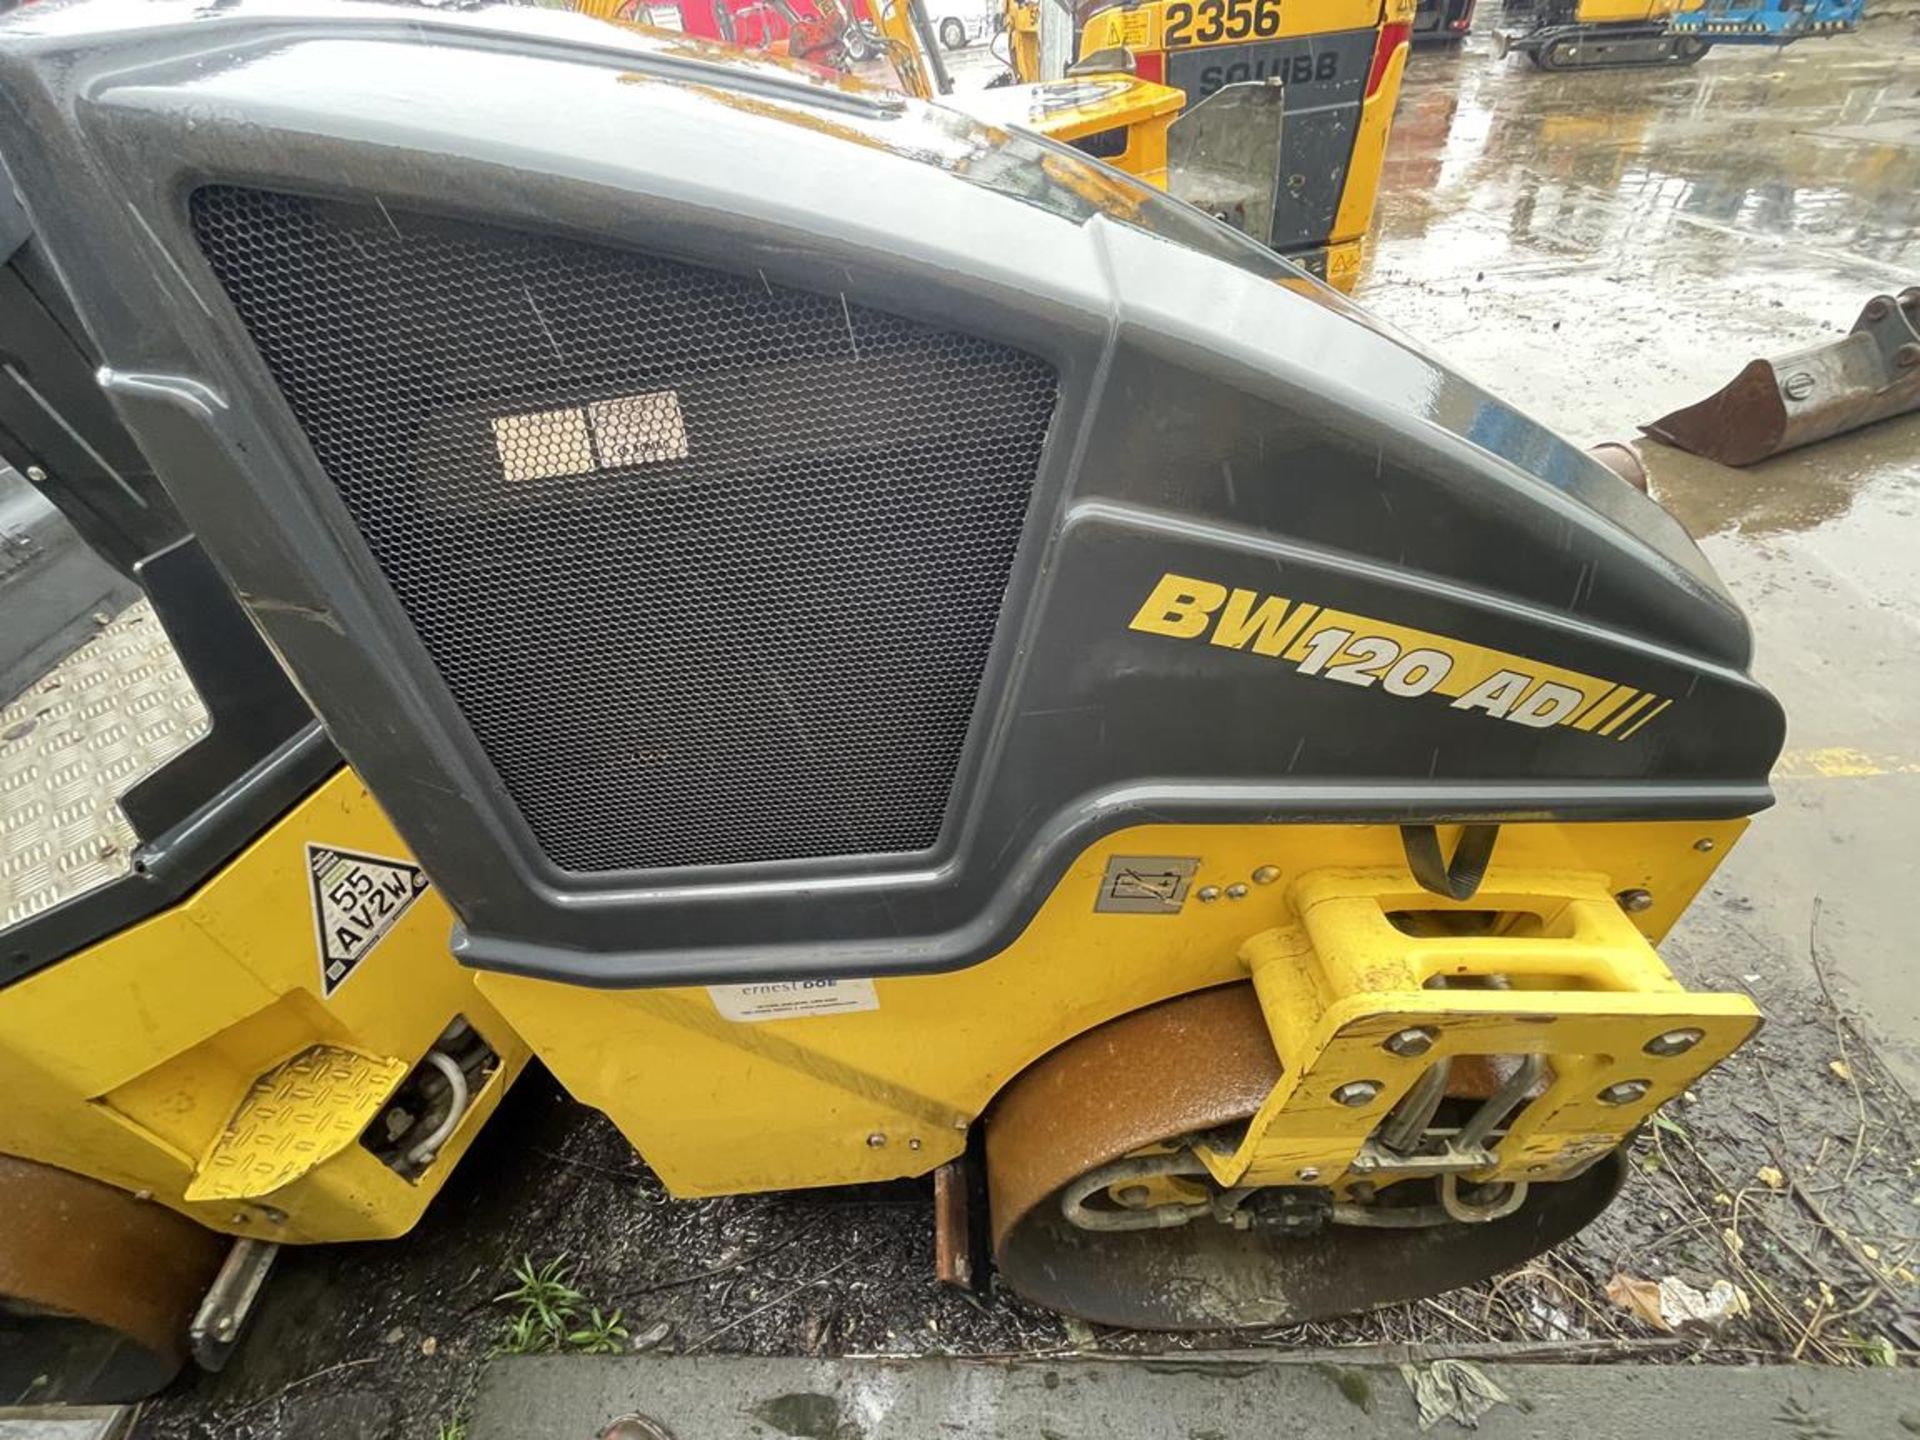 Bomag BW120 AD-5 Tandem Roller, 2700/3500kg Operating Mass S/No. 101880471203 (YOM: 2019) - Image 8 of 9